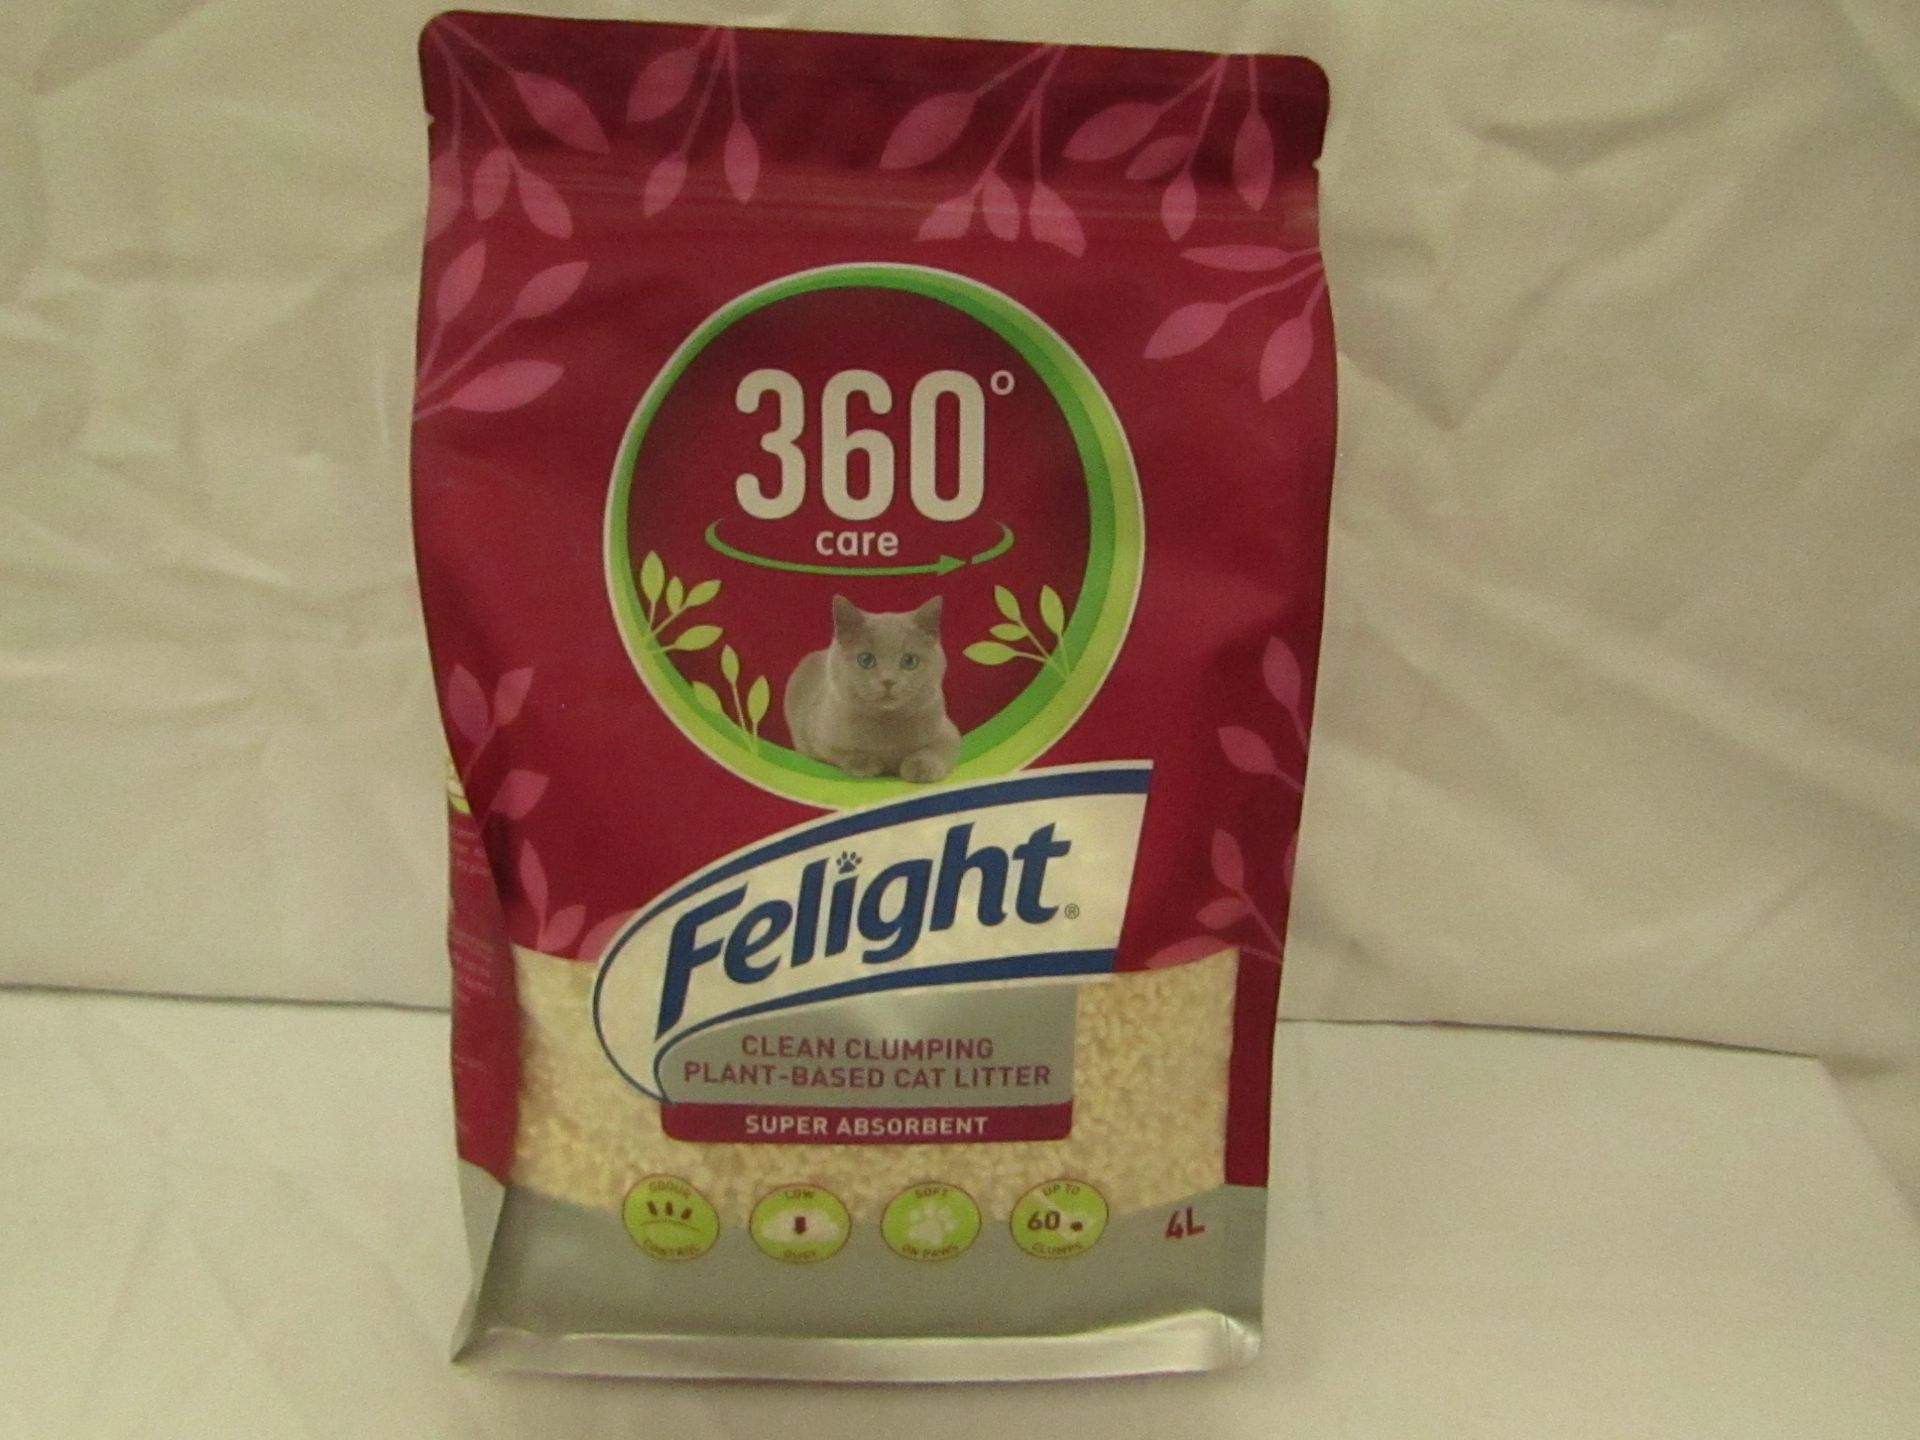 360 Care - Felight Super Absorbent Clean Clumping Plant-Based Cat Litter - 4L Pack - Unused &